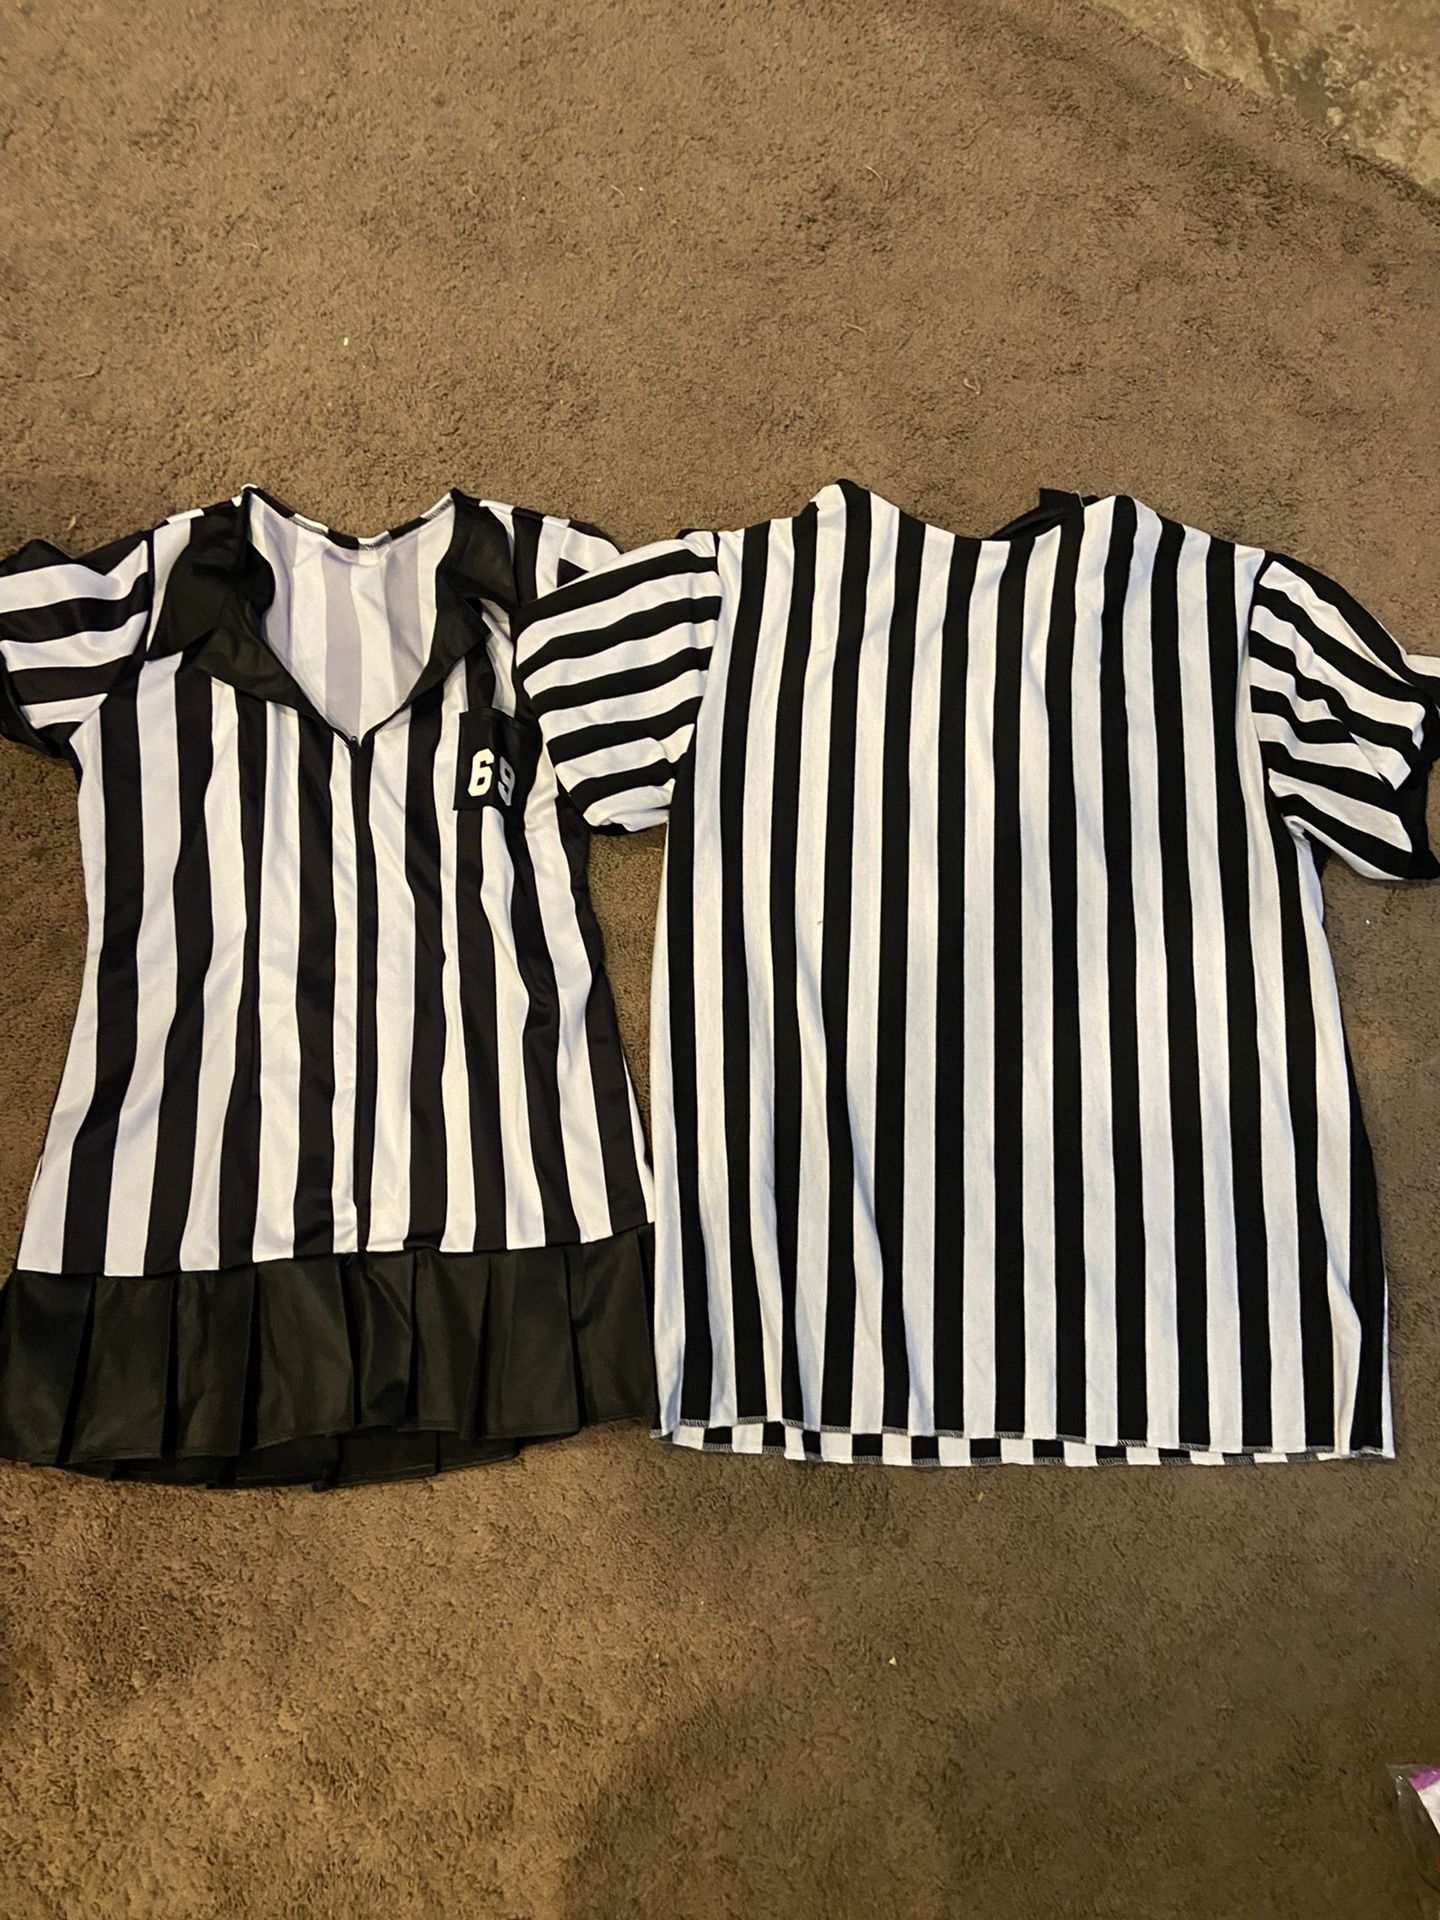 Couples Referee Costumes